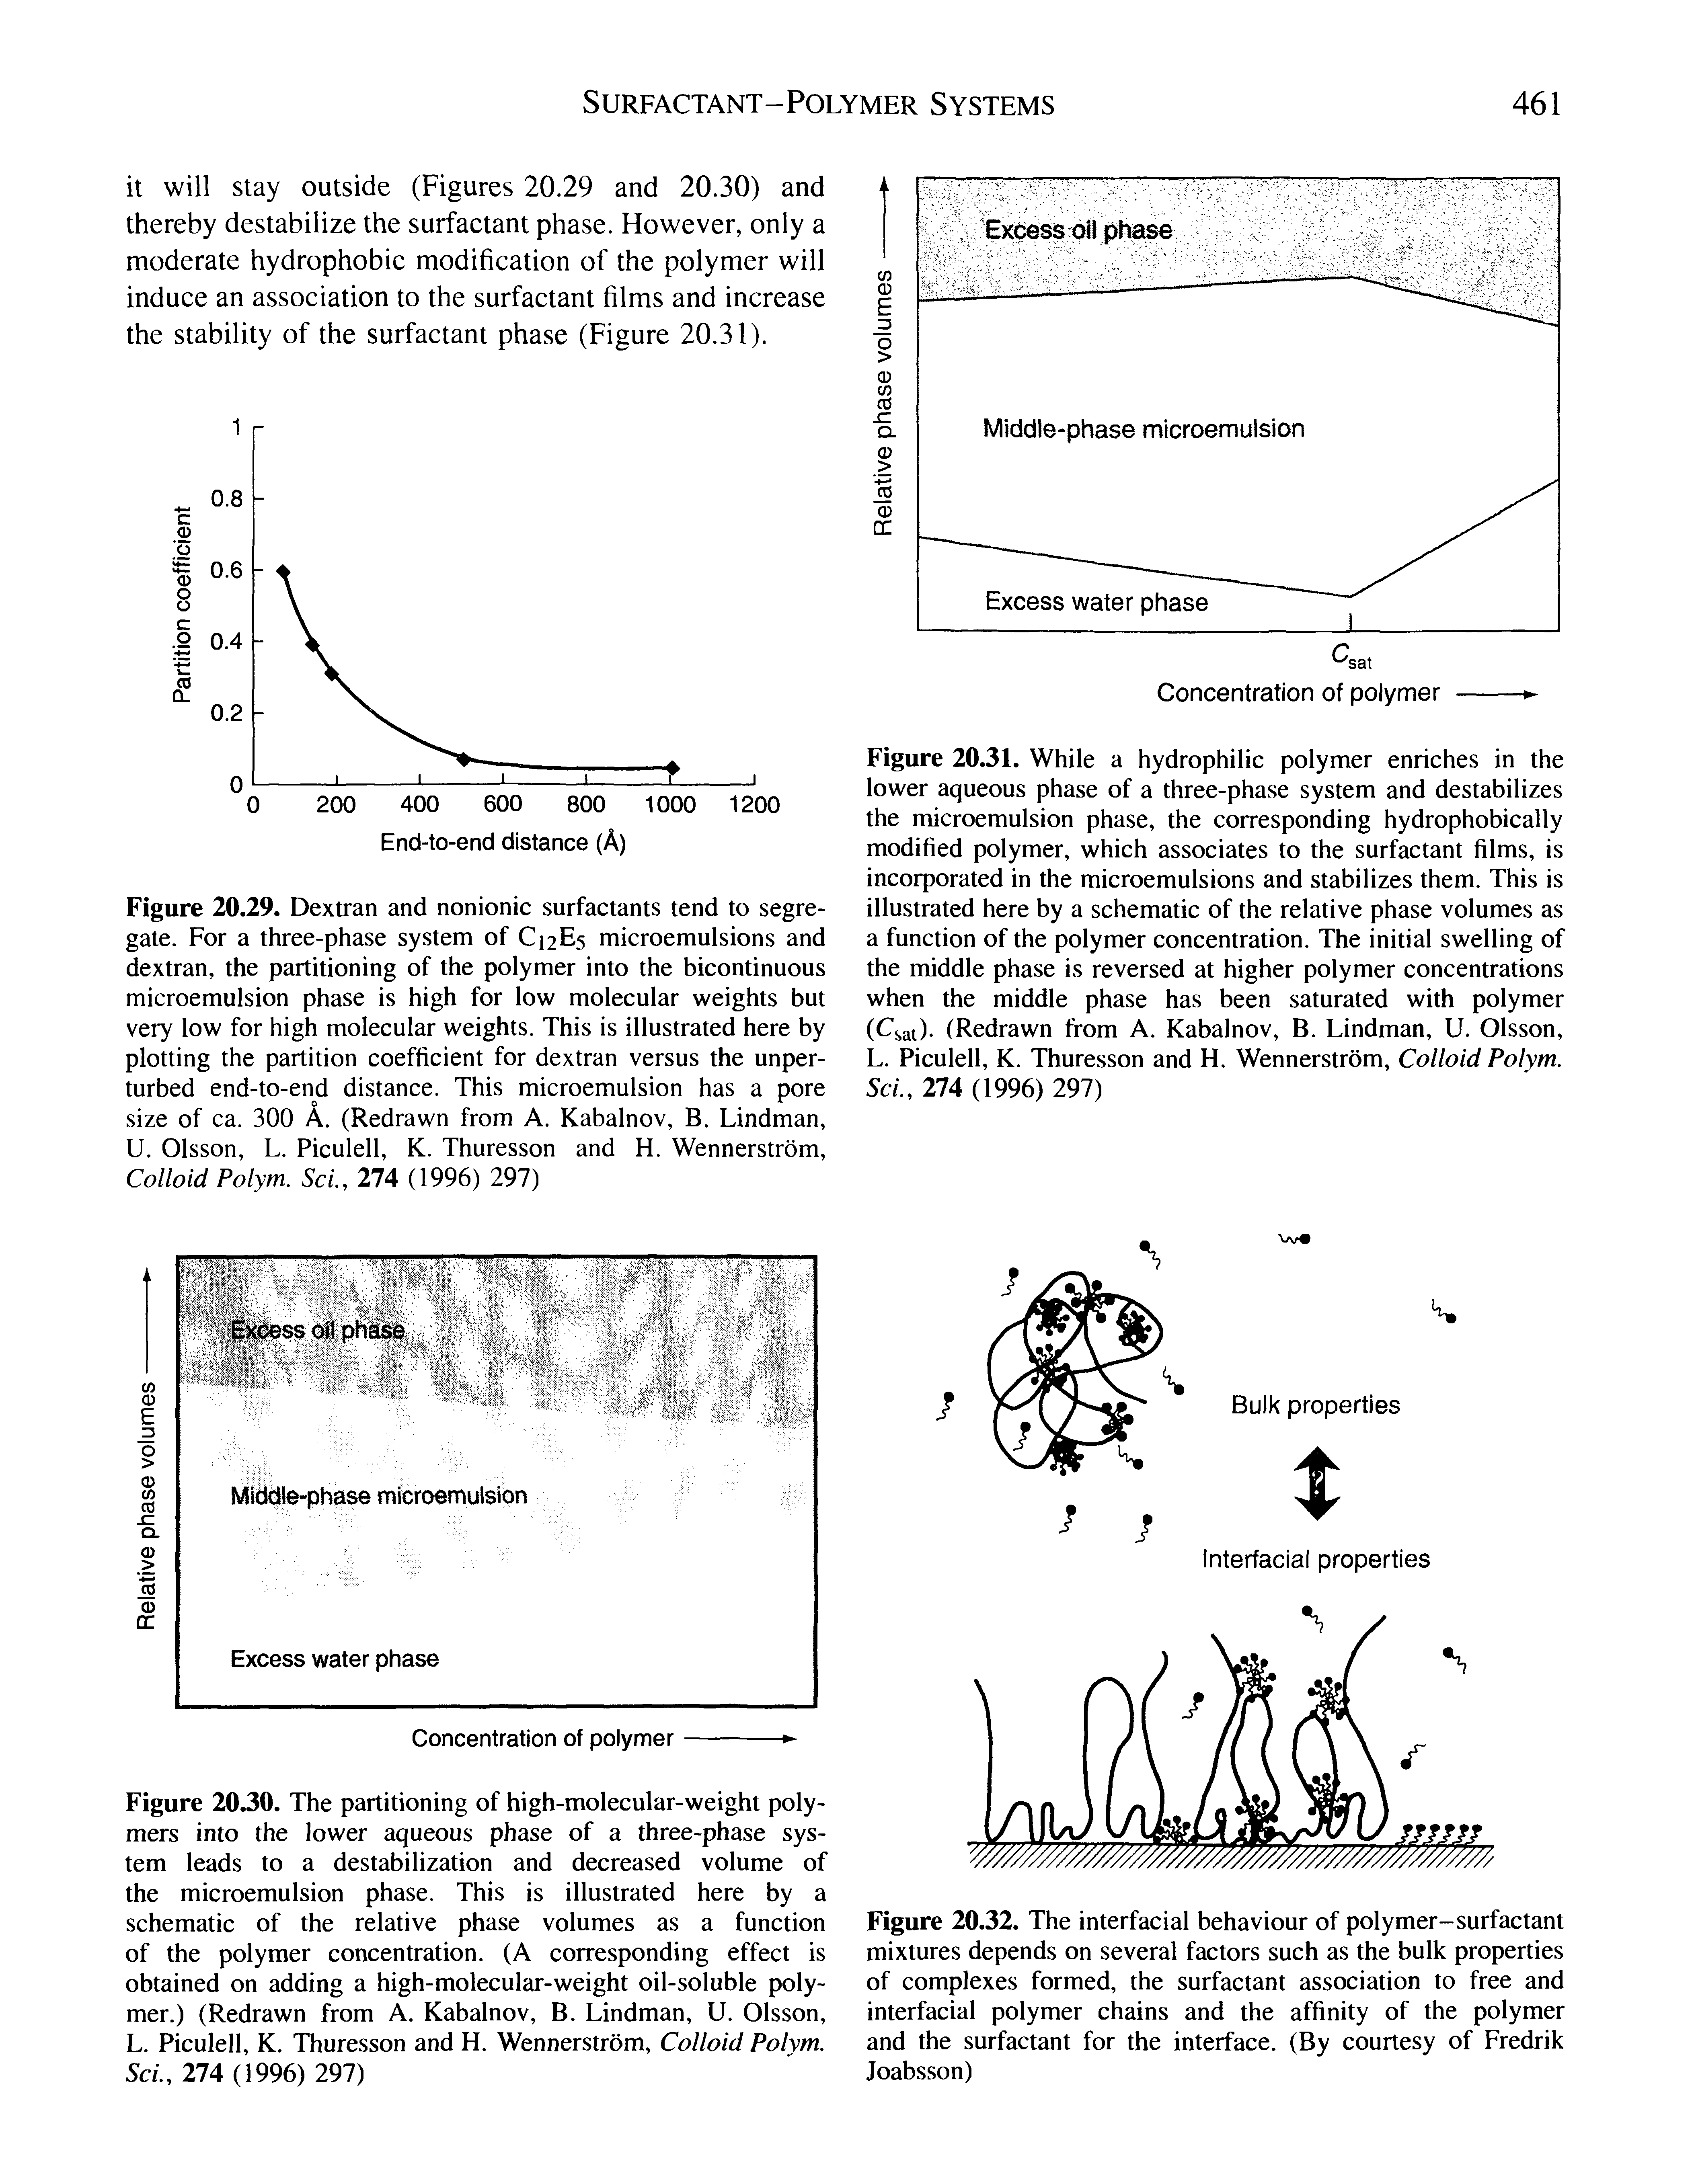 Figure 20.32. The interfacial behaviour of polymer-surfactant mixtures depends on several factors such as the bulk properties of complexes formed, the surfactant association to free and interfacial polymer chains and the affinity of the polymer and the surfactant for the interface. (By courtesy of Fredrik Joabsson)...